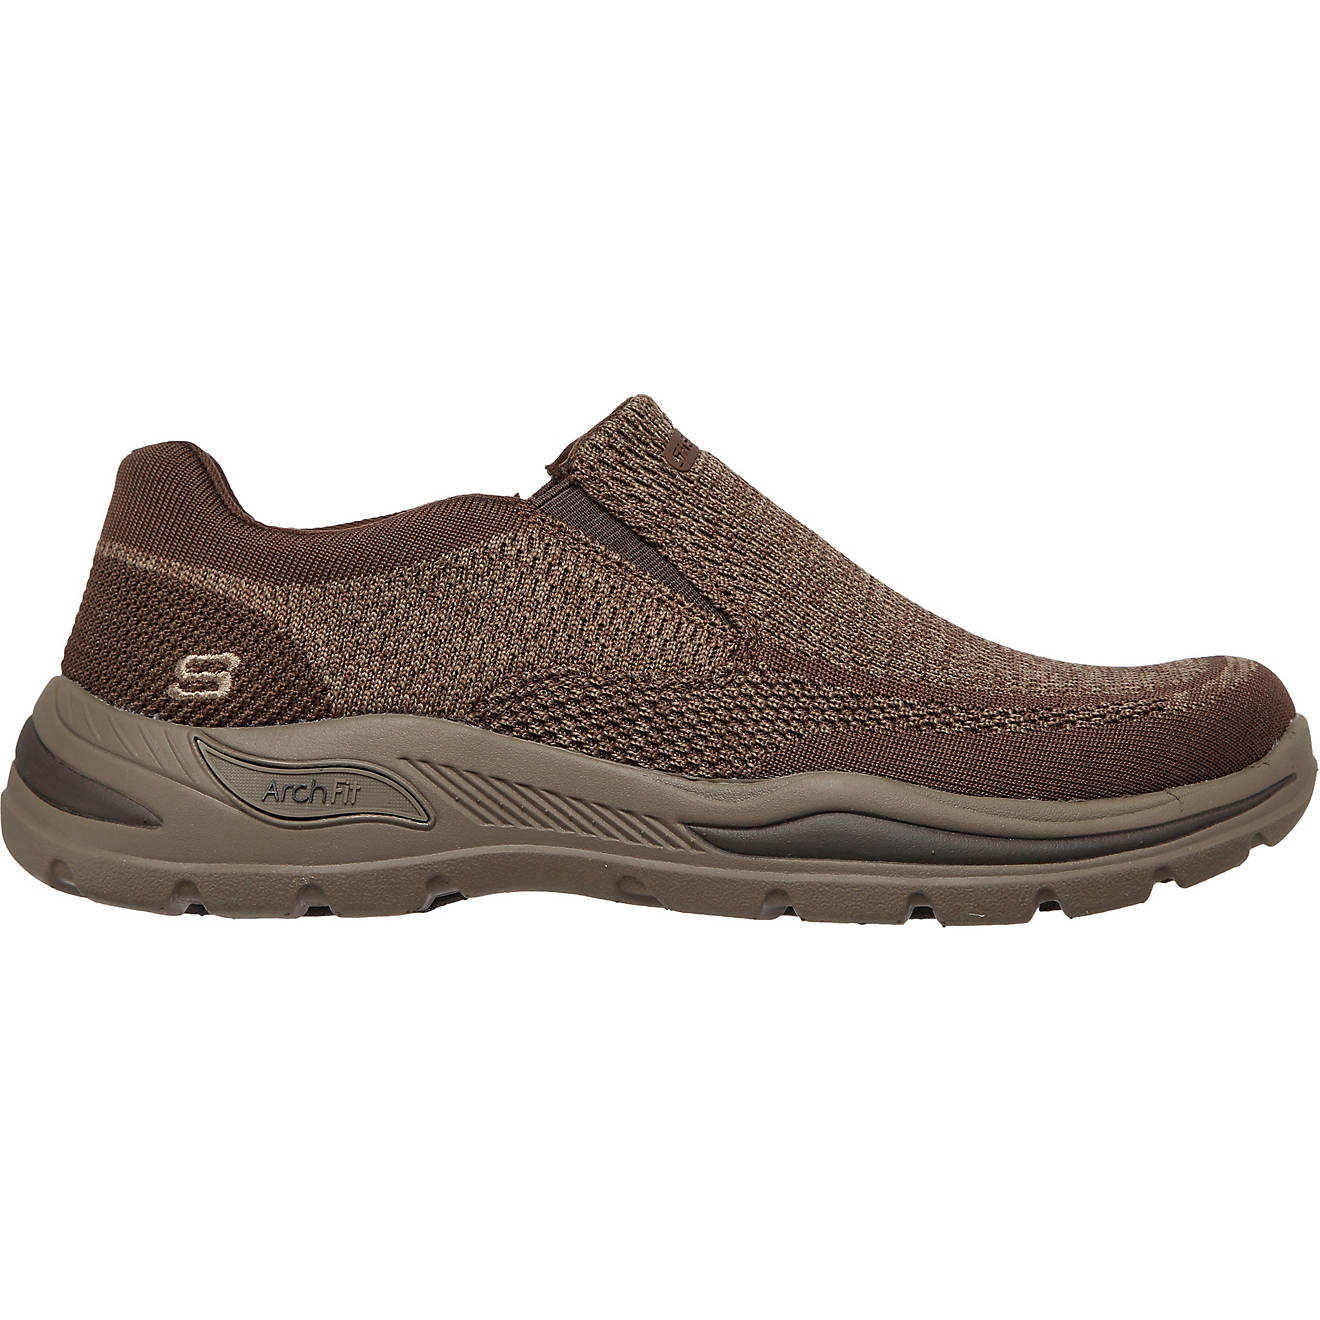 SKECHERS Men's Arch Fit Motley Vaseo Shoes                                                                                       - view number 1